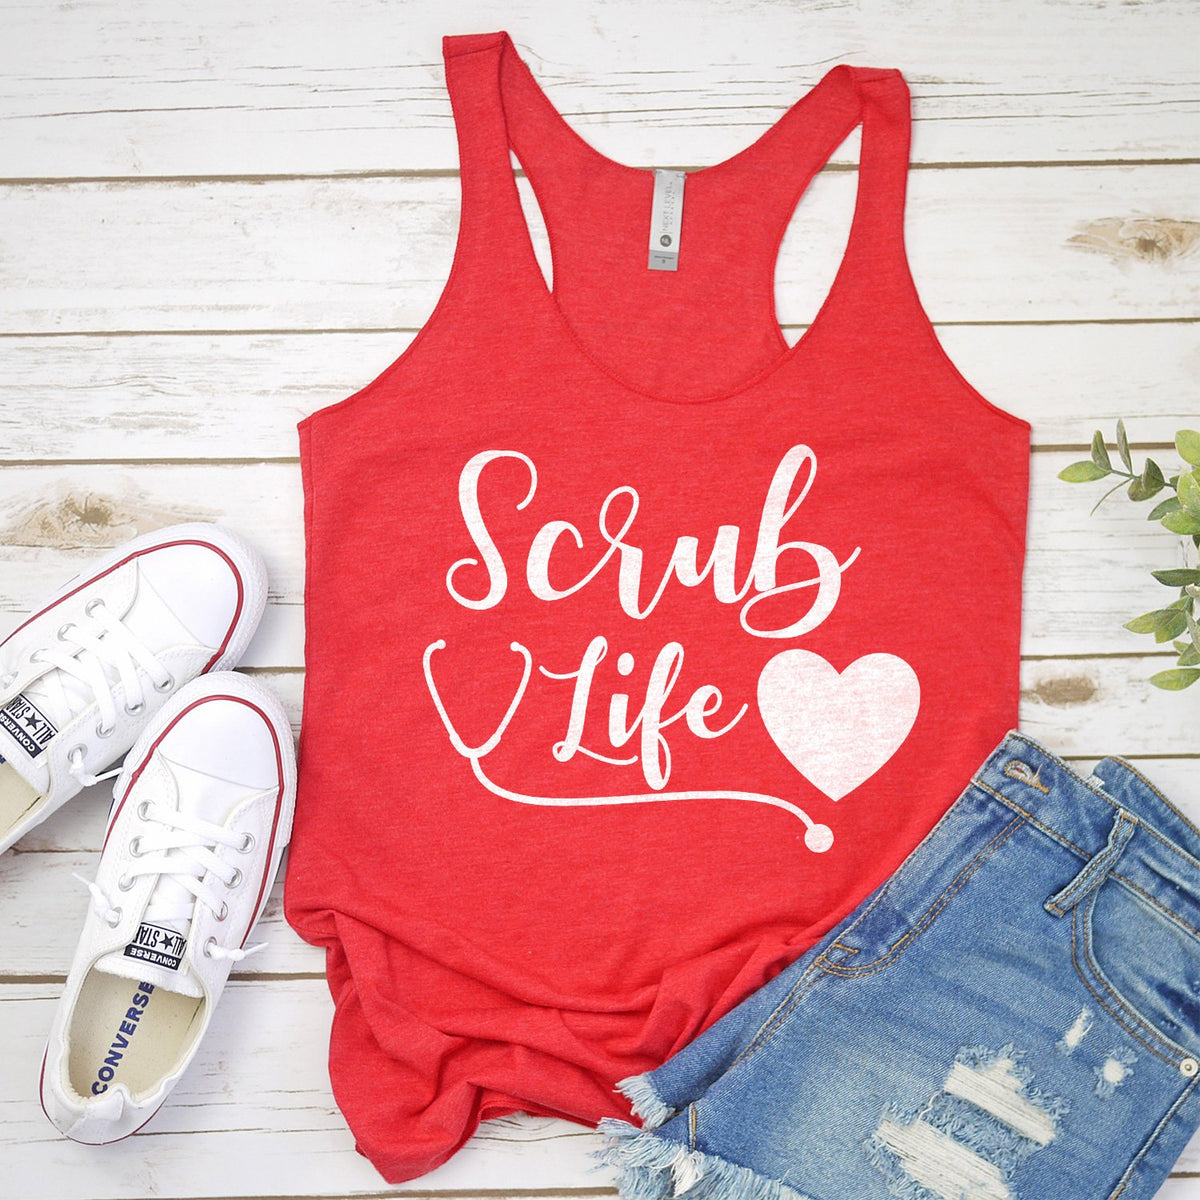 Scrub Life with Stethoscope and Heart - Tank Top Racerback